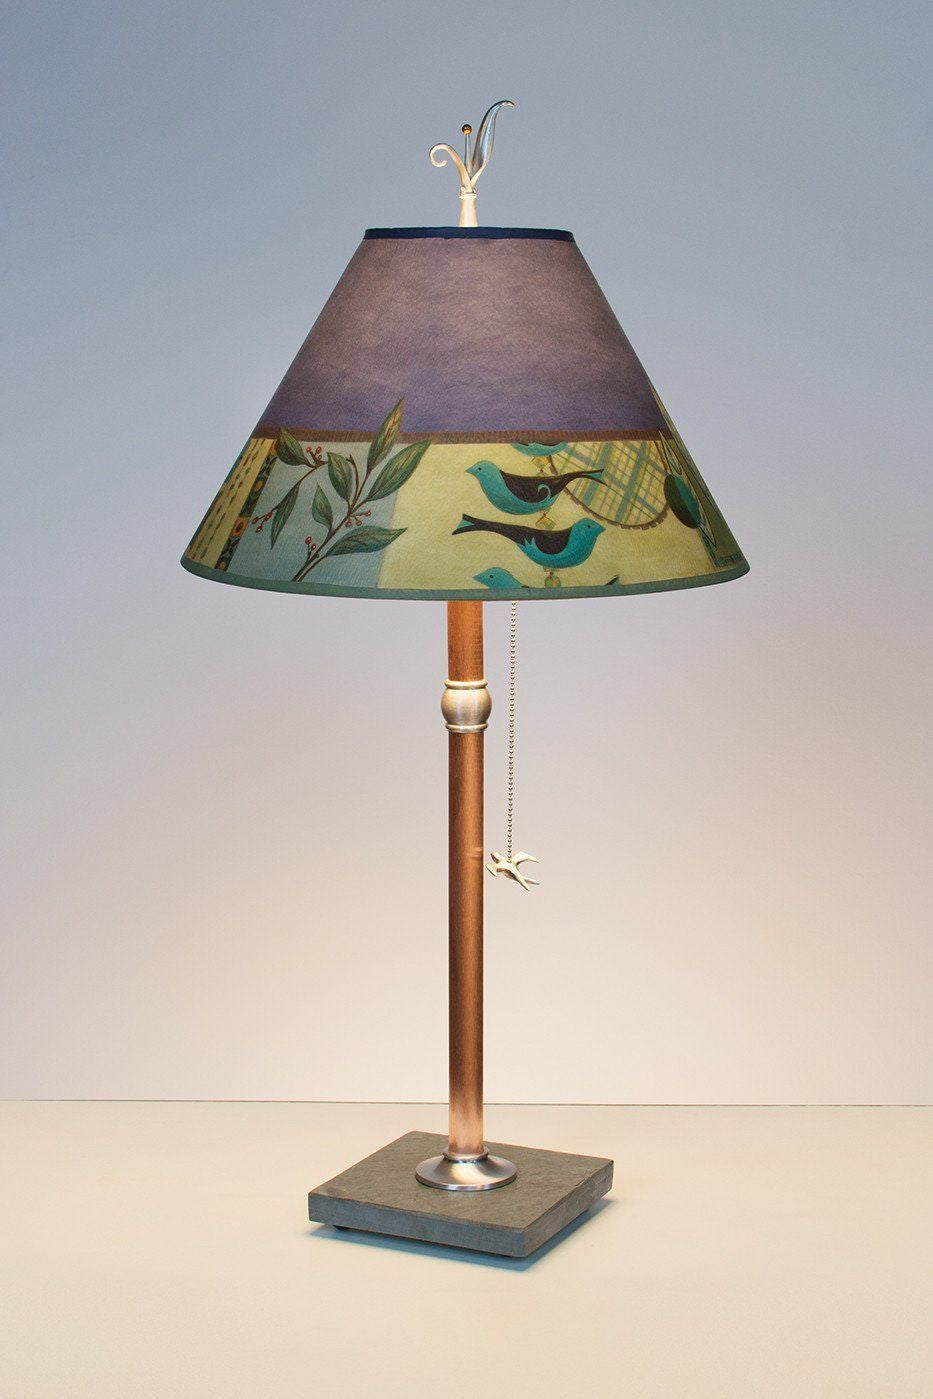 Janna Ugone & Co Table Lamps Copper Table Lamp with Medium Conical Shade in New Capri Periwinkle